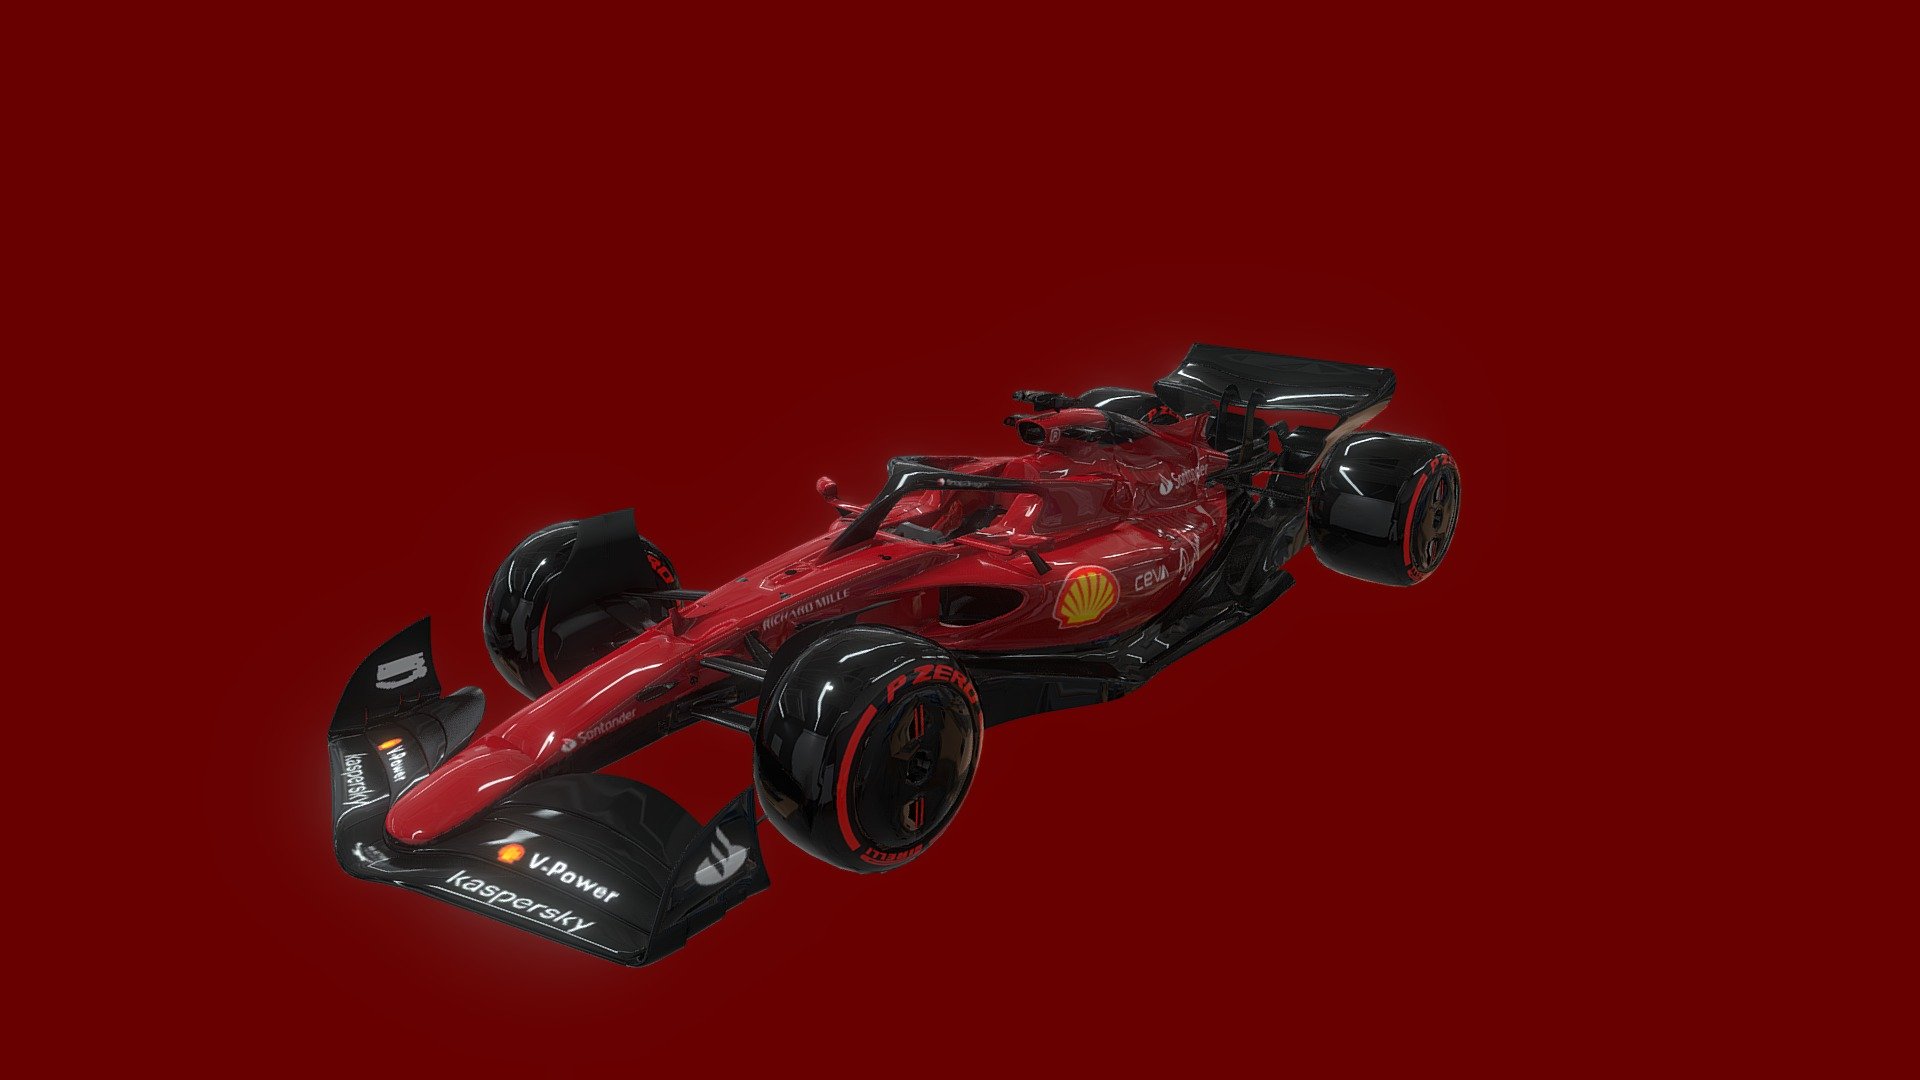 Welcome.
This is my new model of the ferrari for the 2022 season, I hope you like the model 3d model